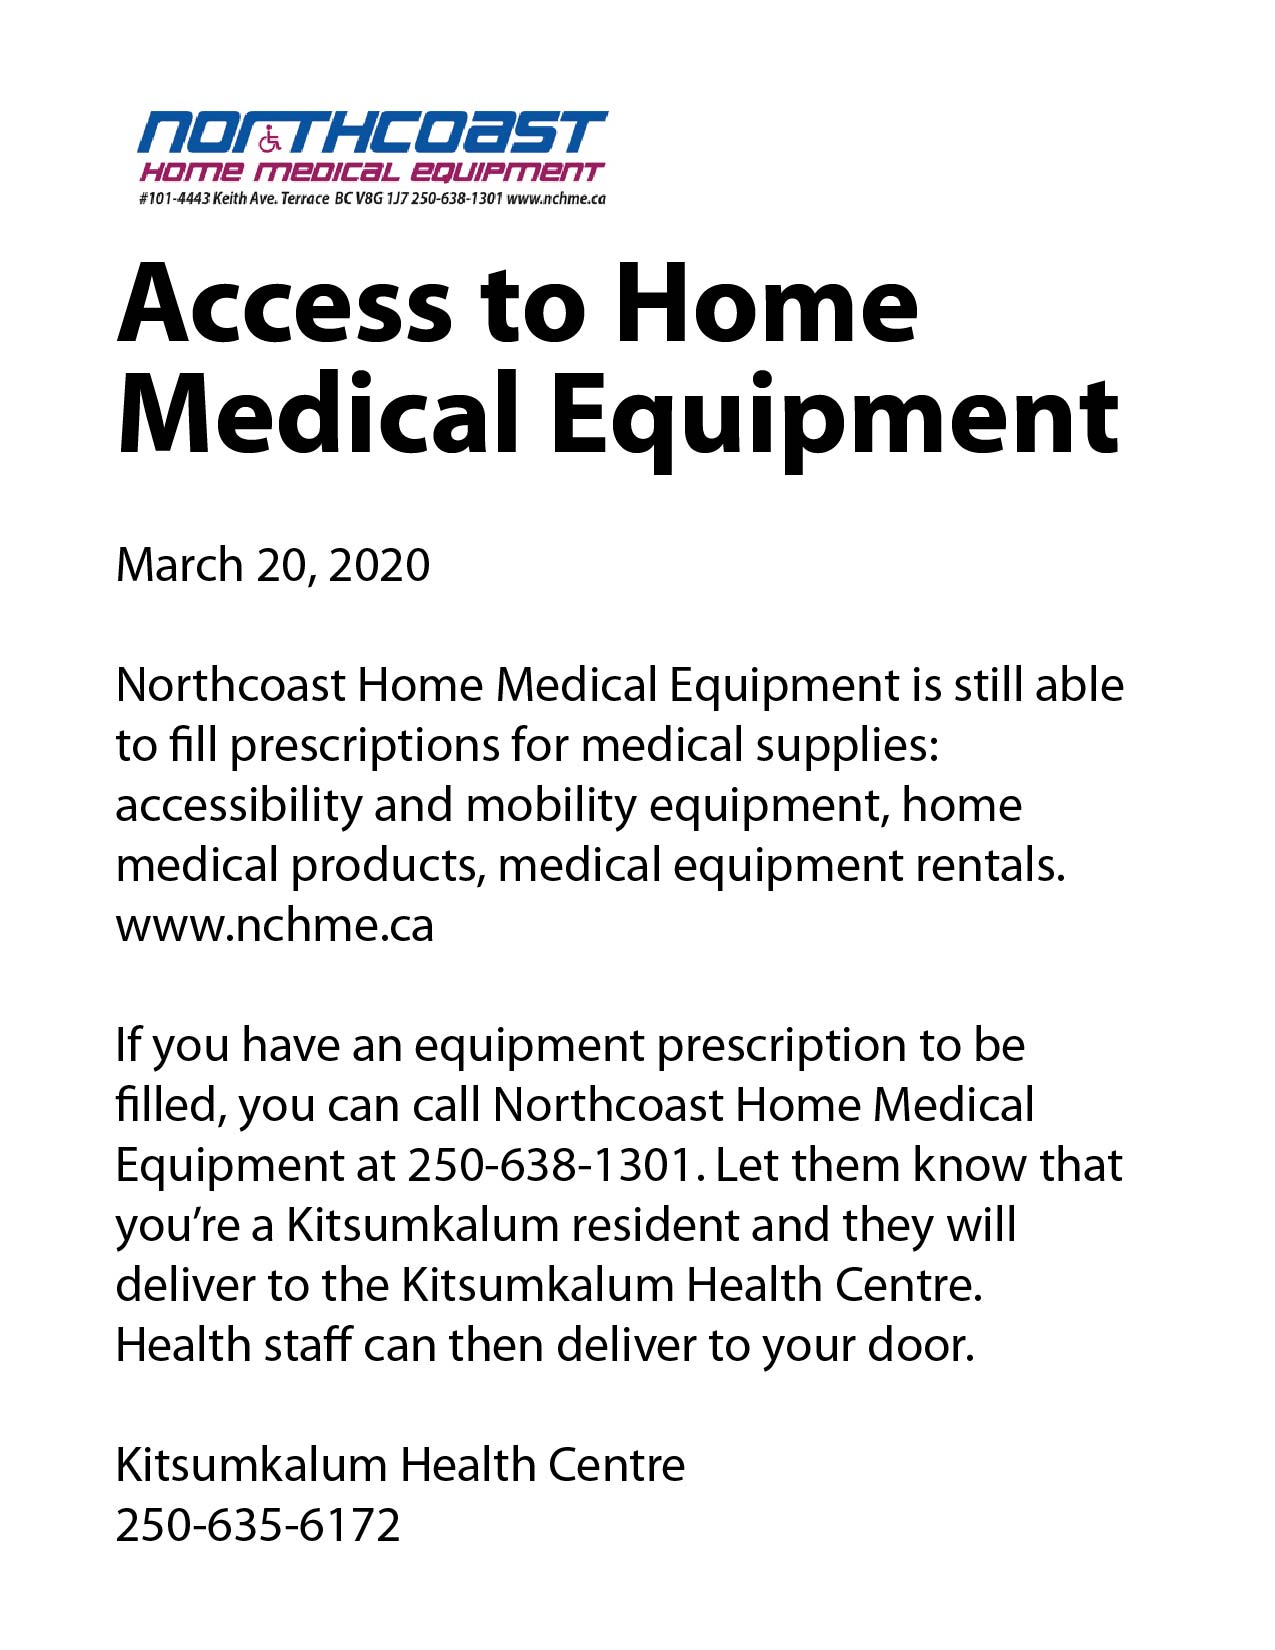 Access to Home Medical Equipment